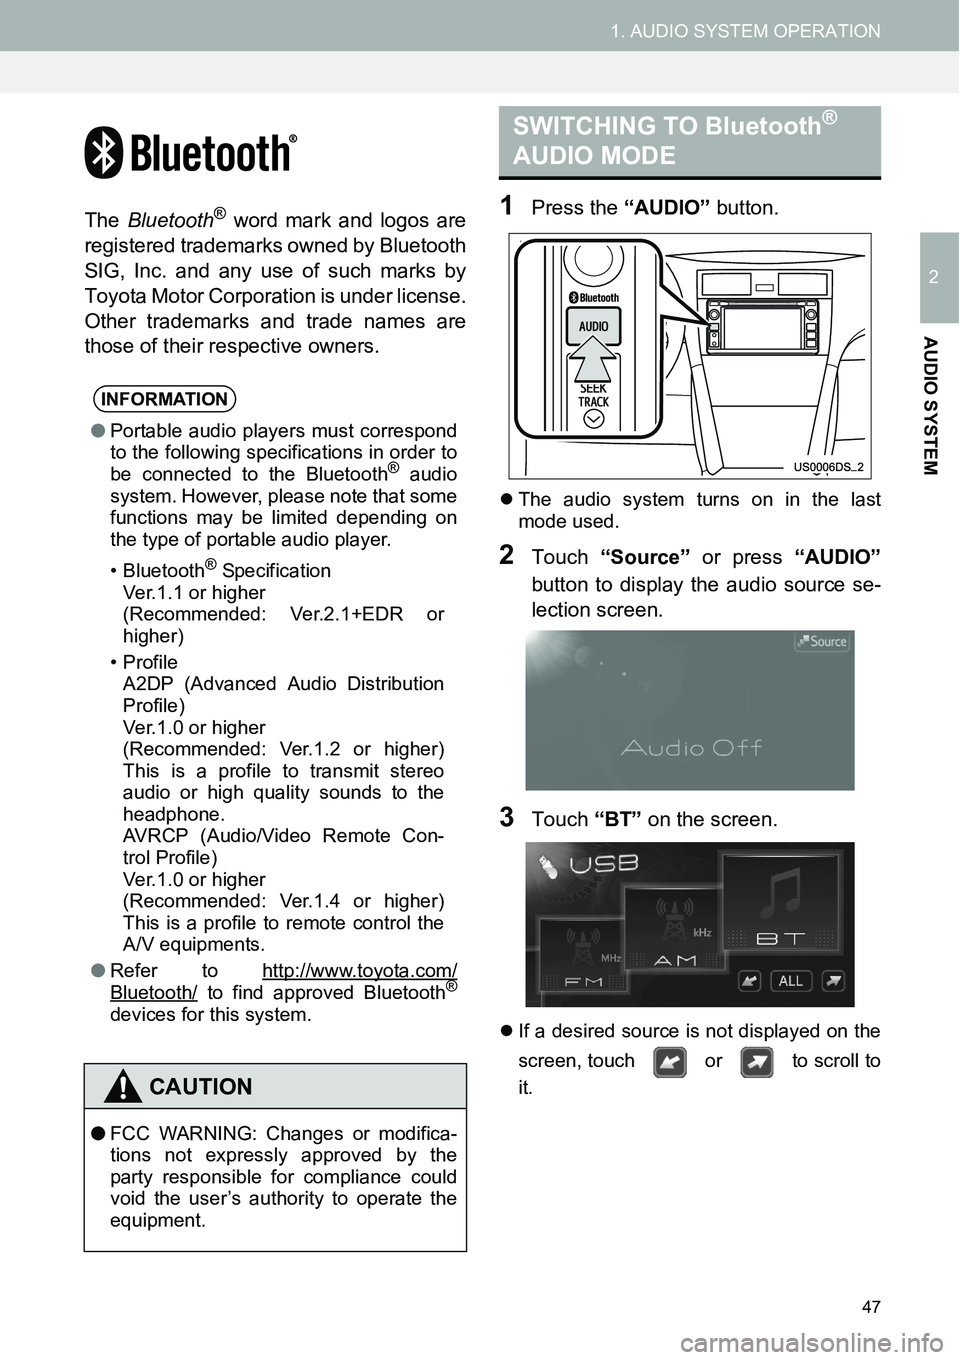 TOYOTA xB 2013  Accessories, Audio & Navigation (in English) 47
1. AUDIO SYSTEM OPERATION
2
AUDIO SYSTEM
The Bluetooth® word mark and logos are
registered trademarks owned by Bluetooth
SIG, Inc. and any use of such marks by
Toyota Motor Corporation is under li